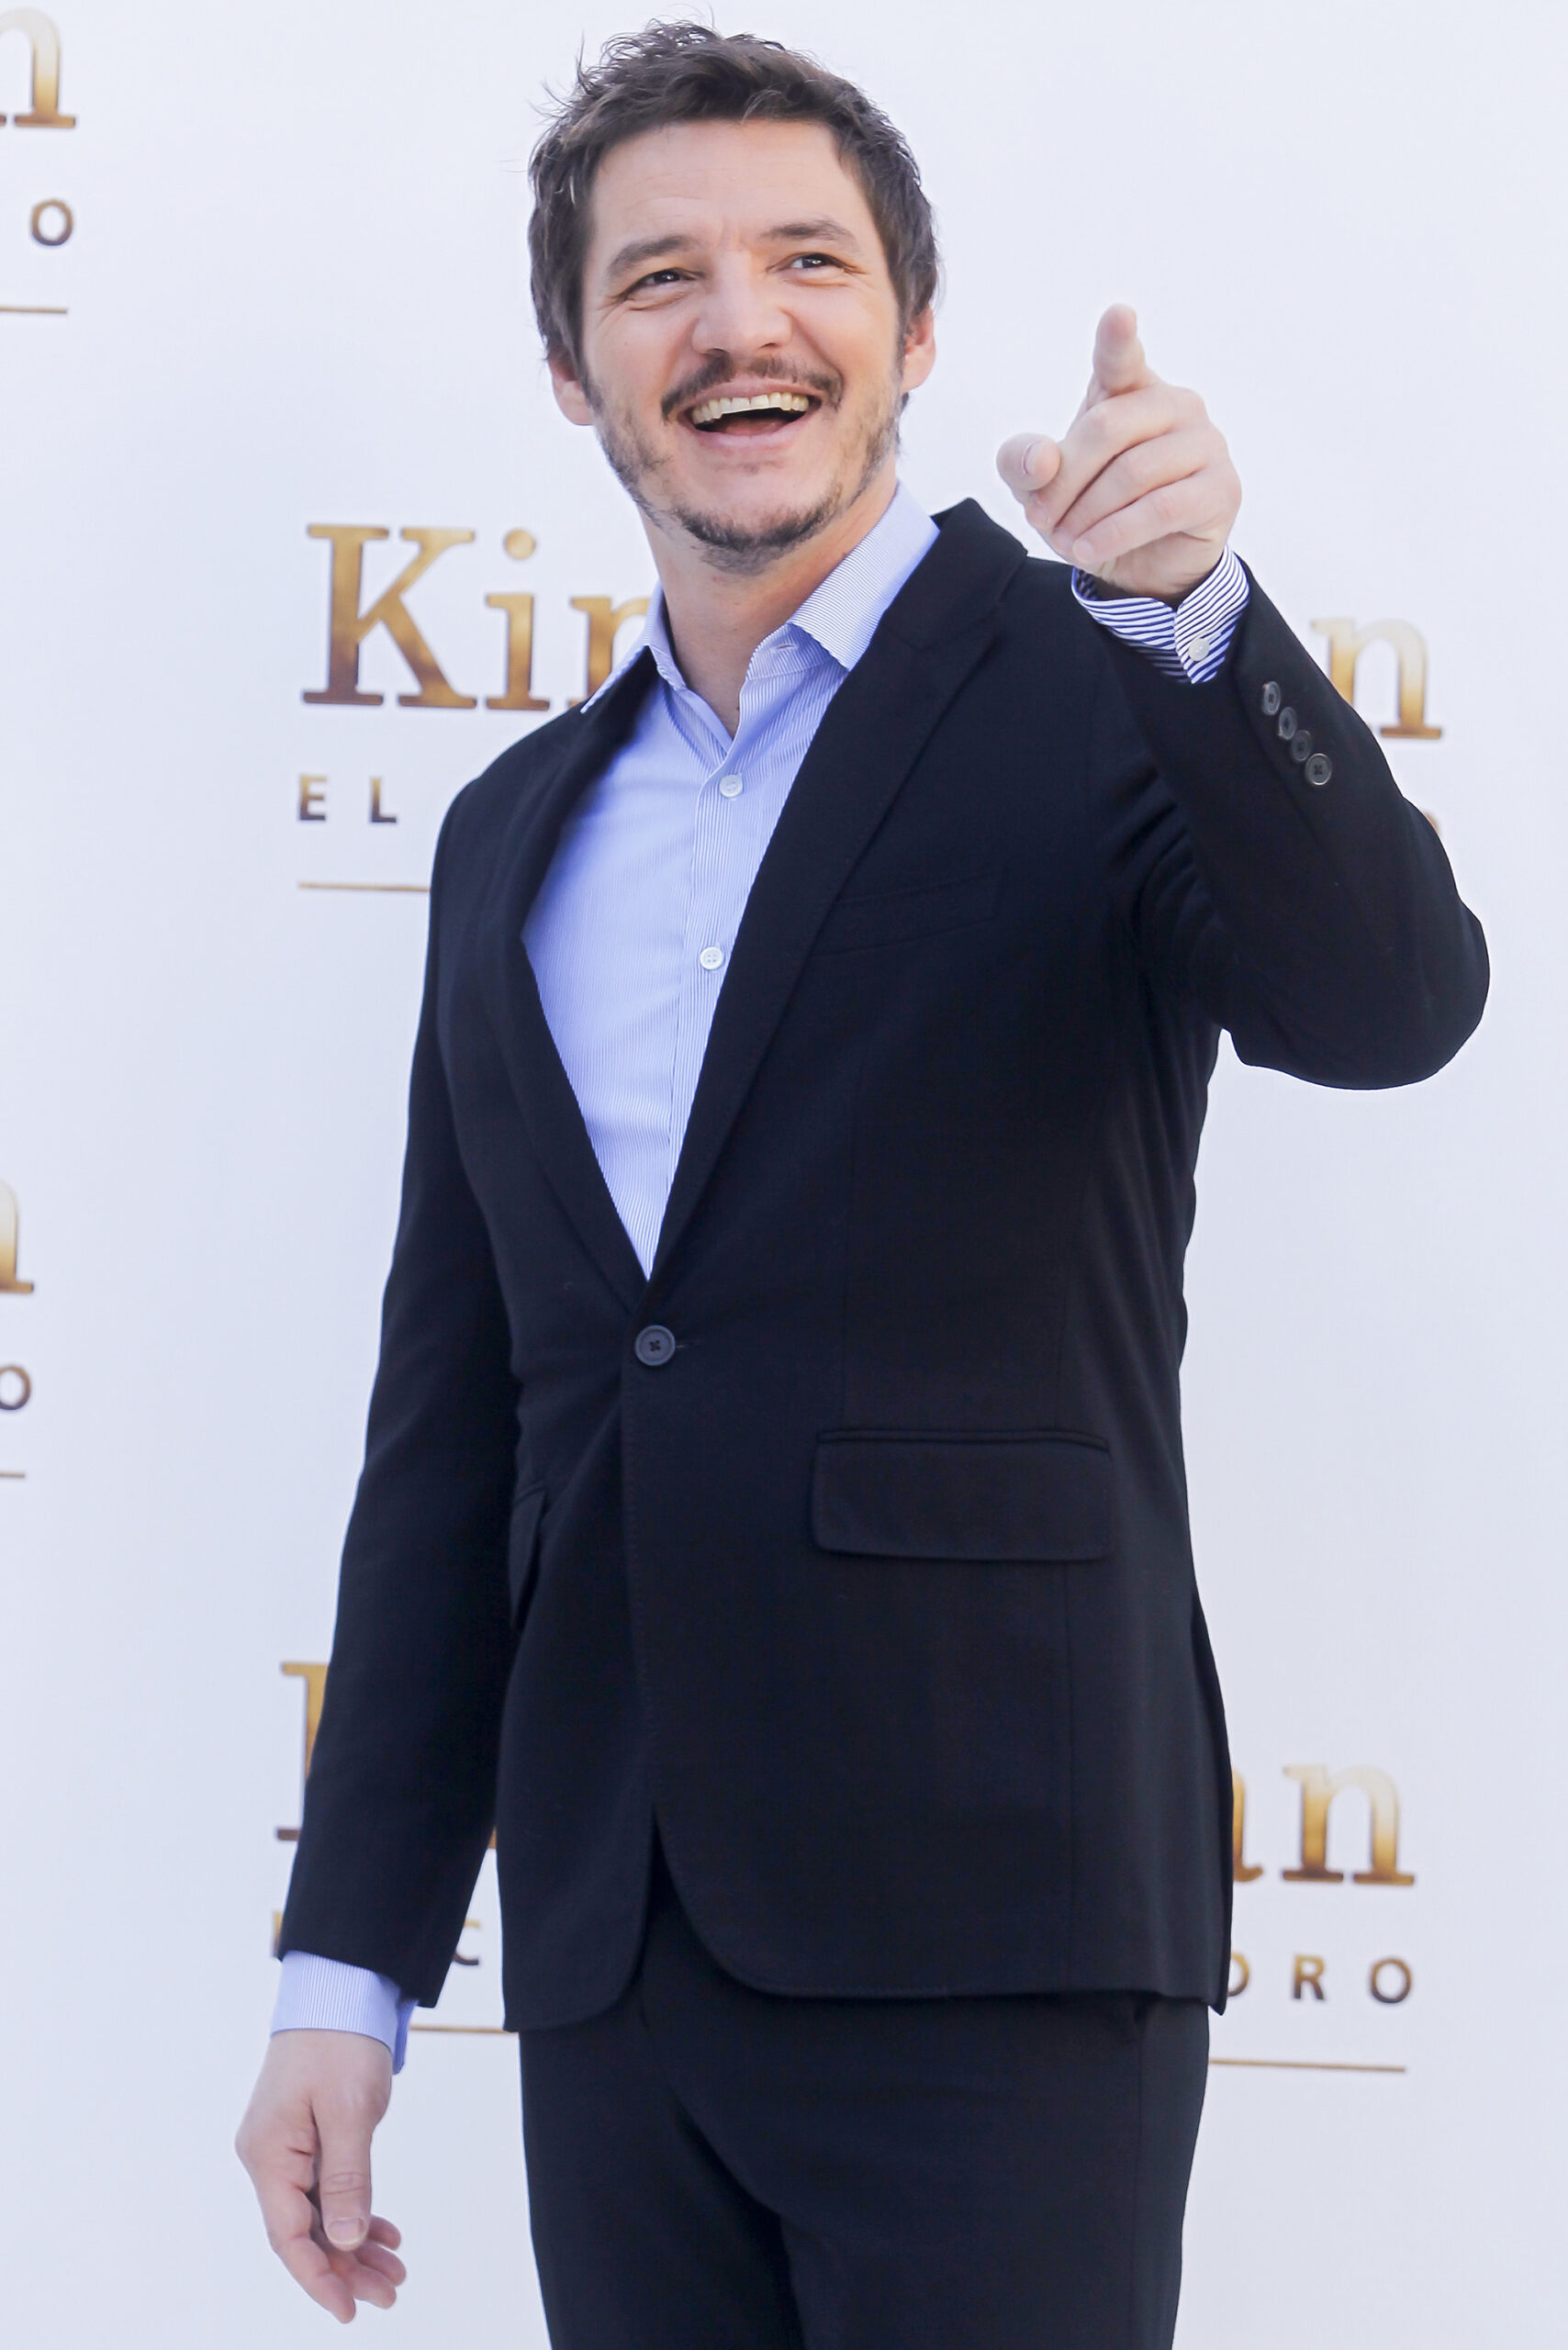 Actor Pedro Pascal attends the "Kingsman: The Golden Circle" photocall at the Palacio de los Duques Hotel on Sept. 20, 2017 in Madrid, Spain. (Andrews Archie/Abaca Press/TNS)